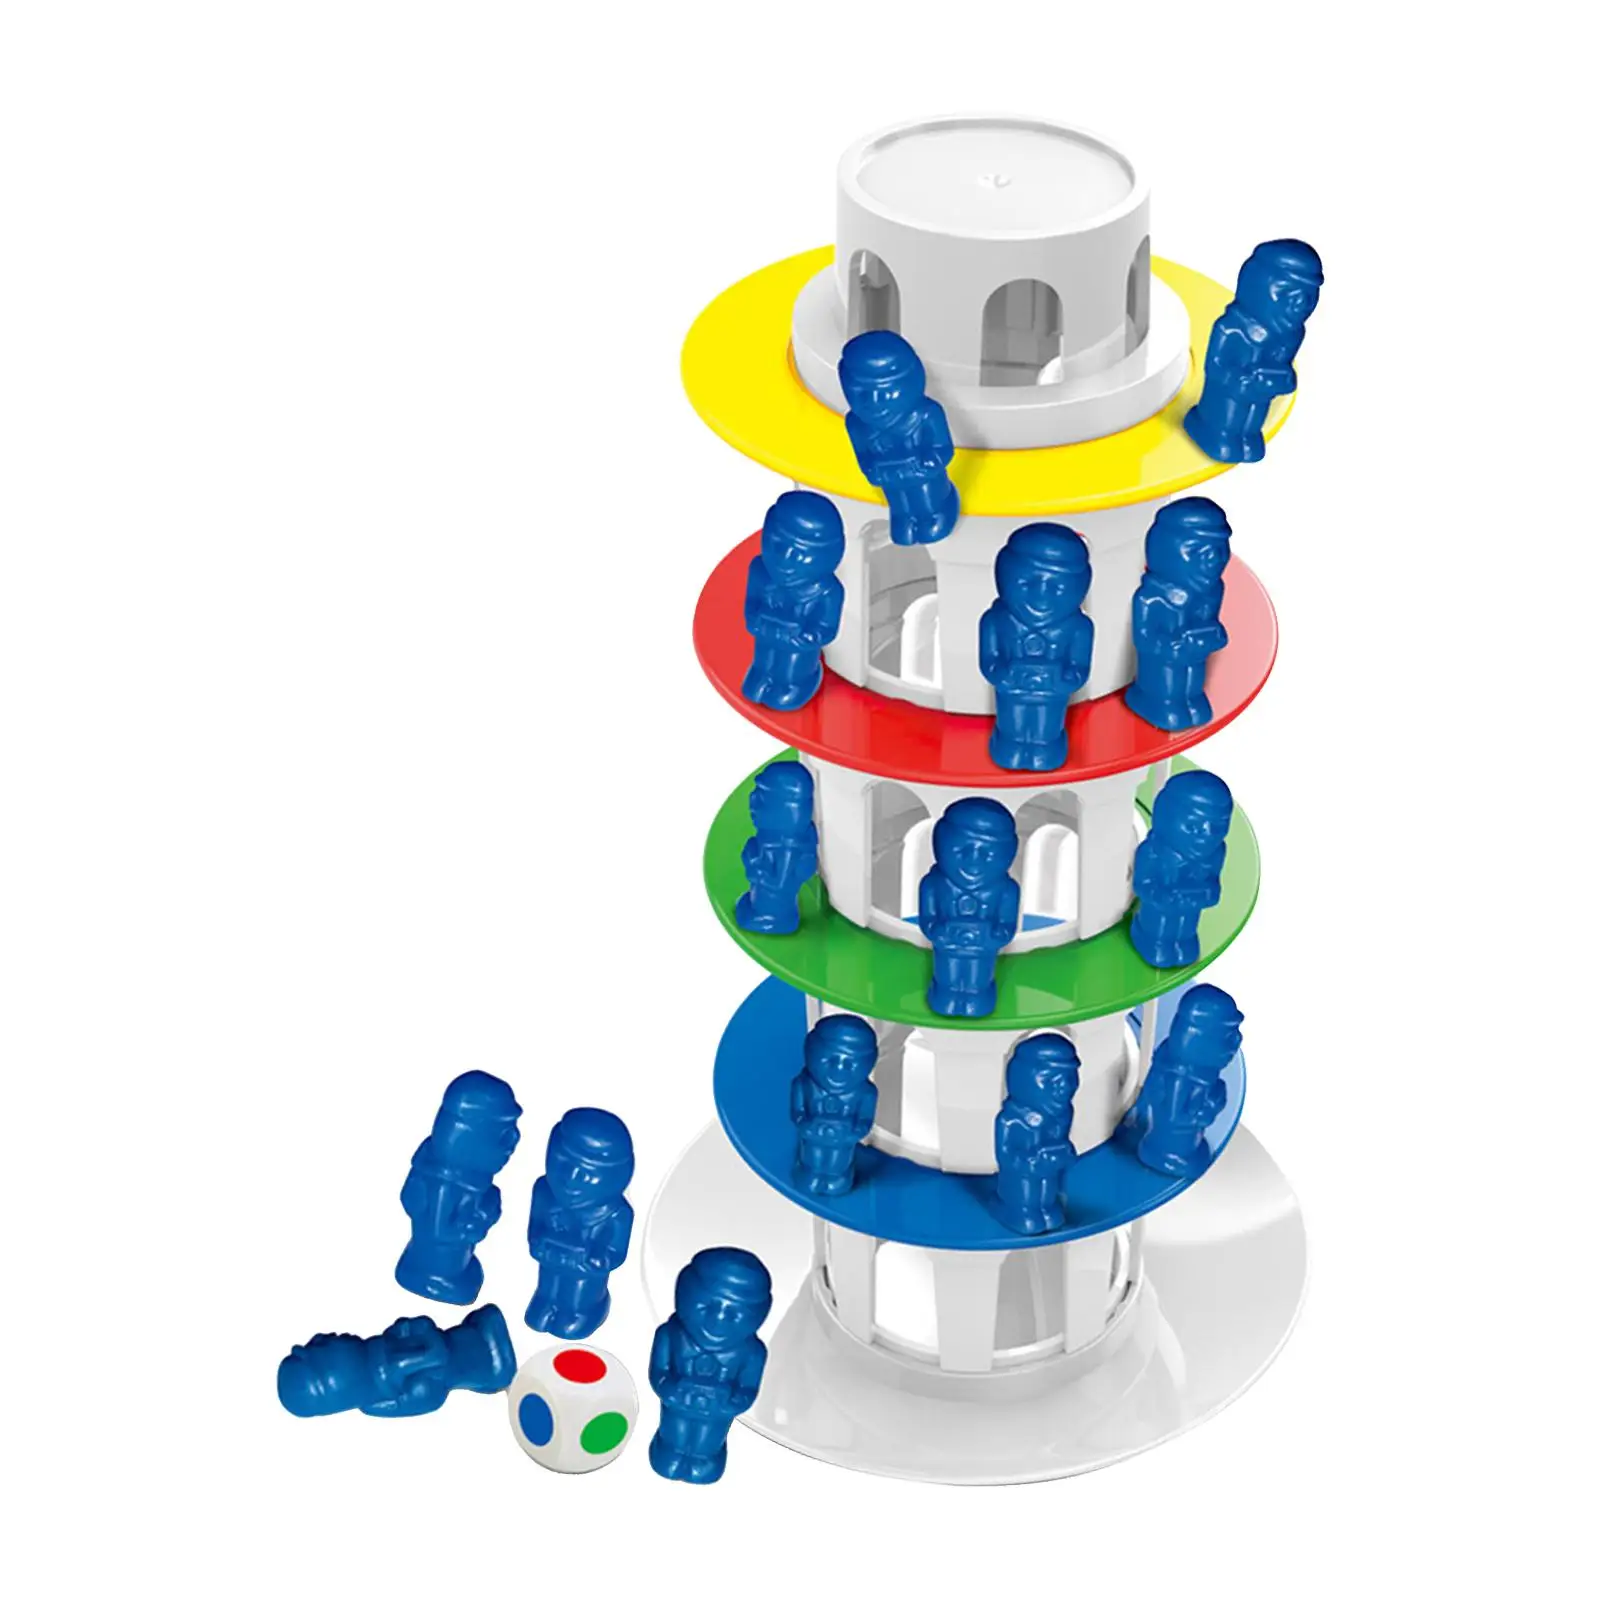 Toppling Leaning Tower Toy Family Games Fine Motor Skill for Kids